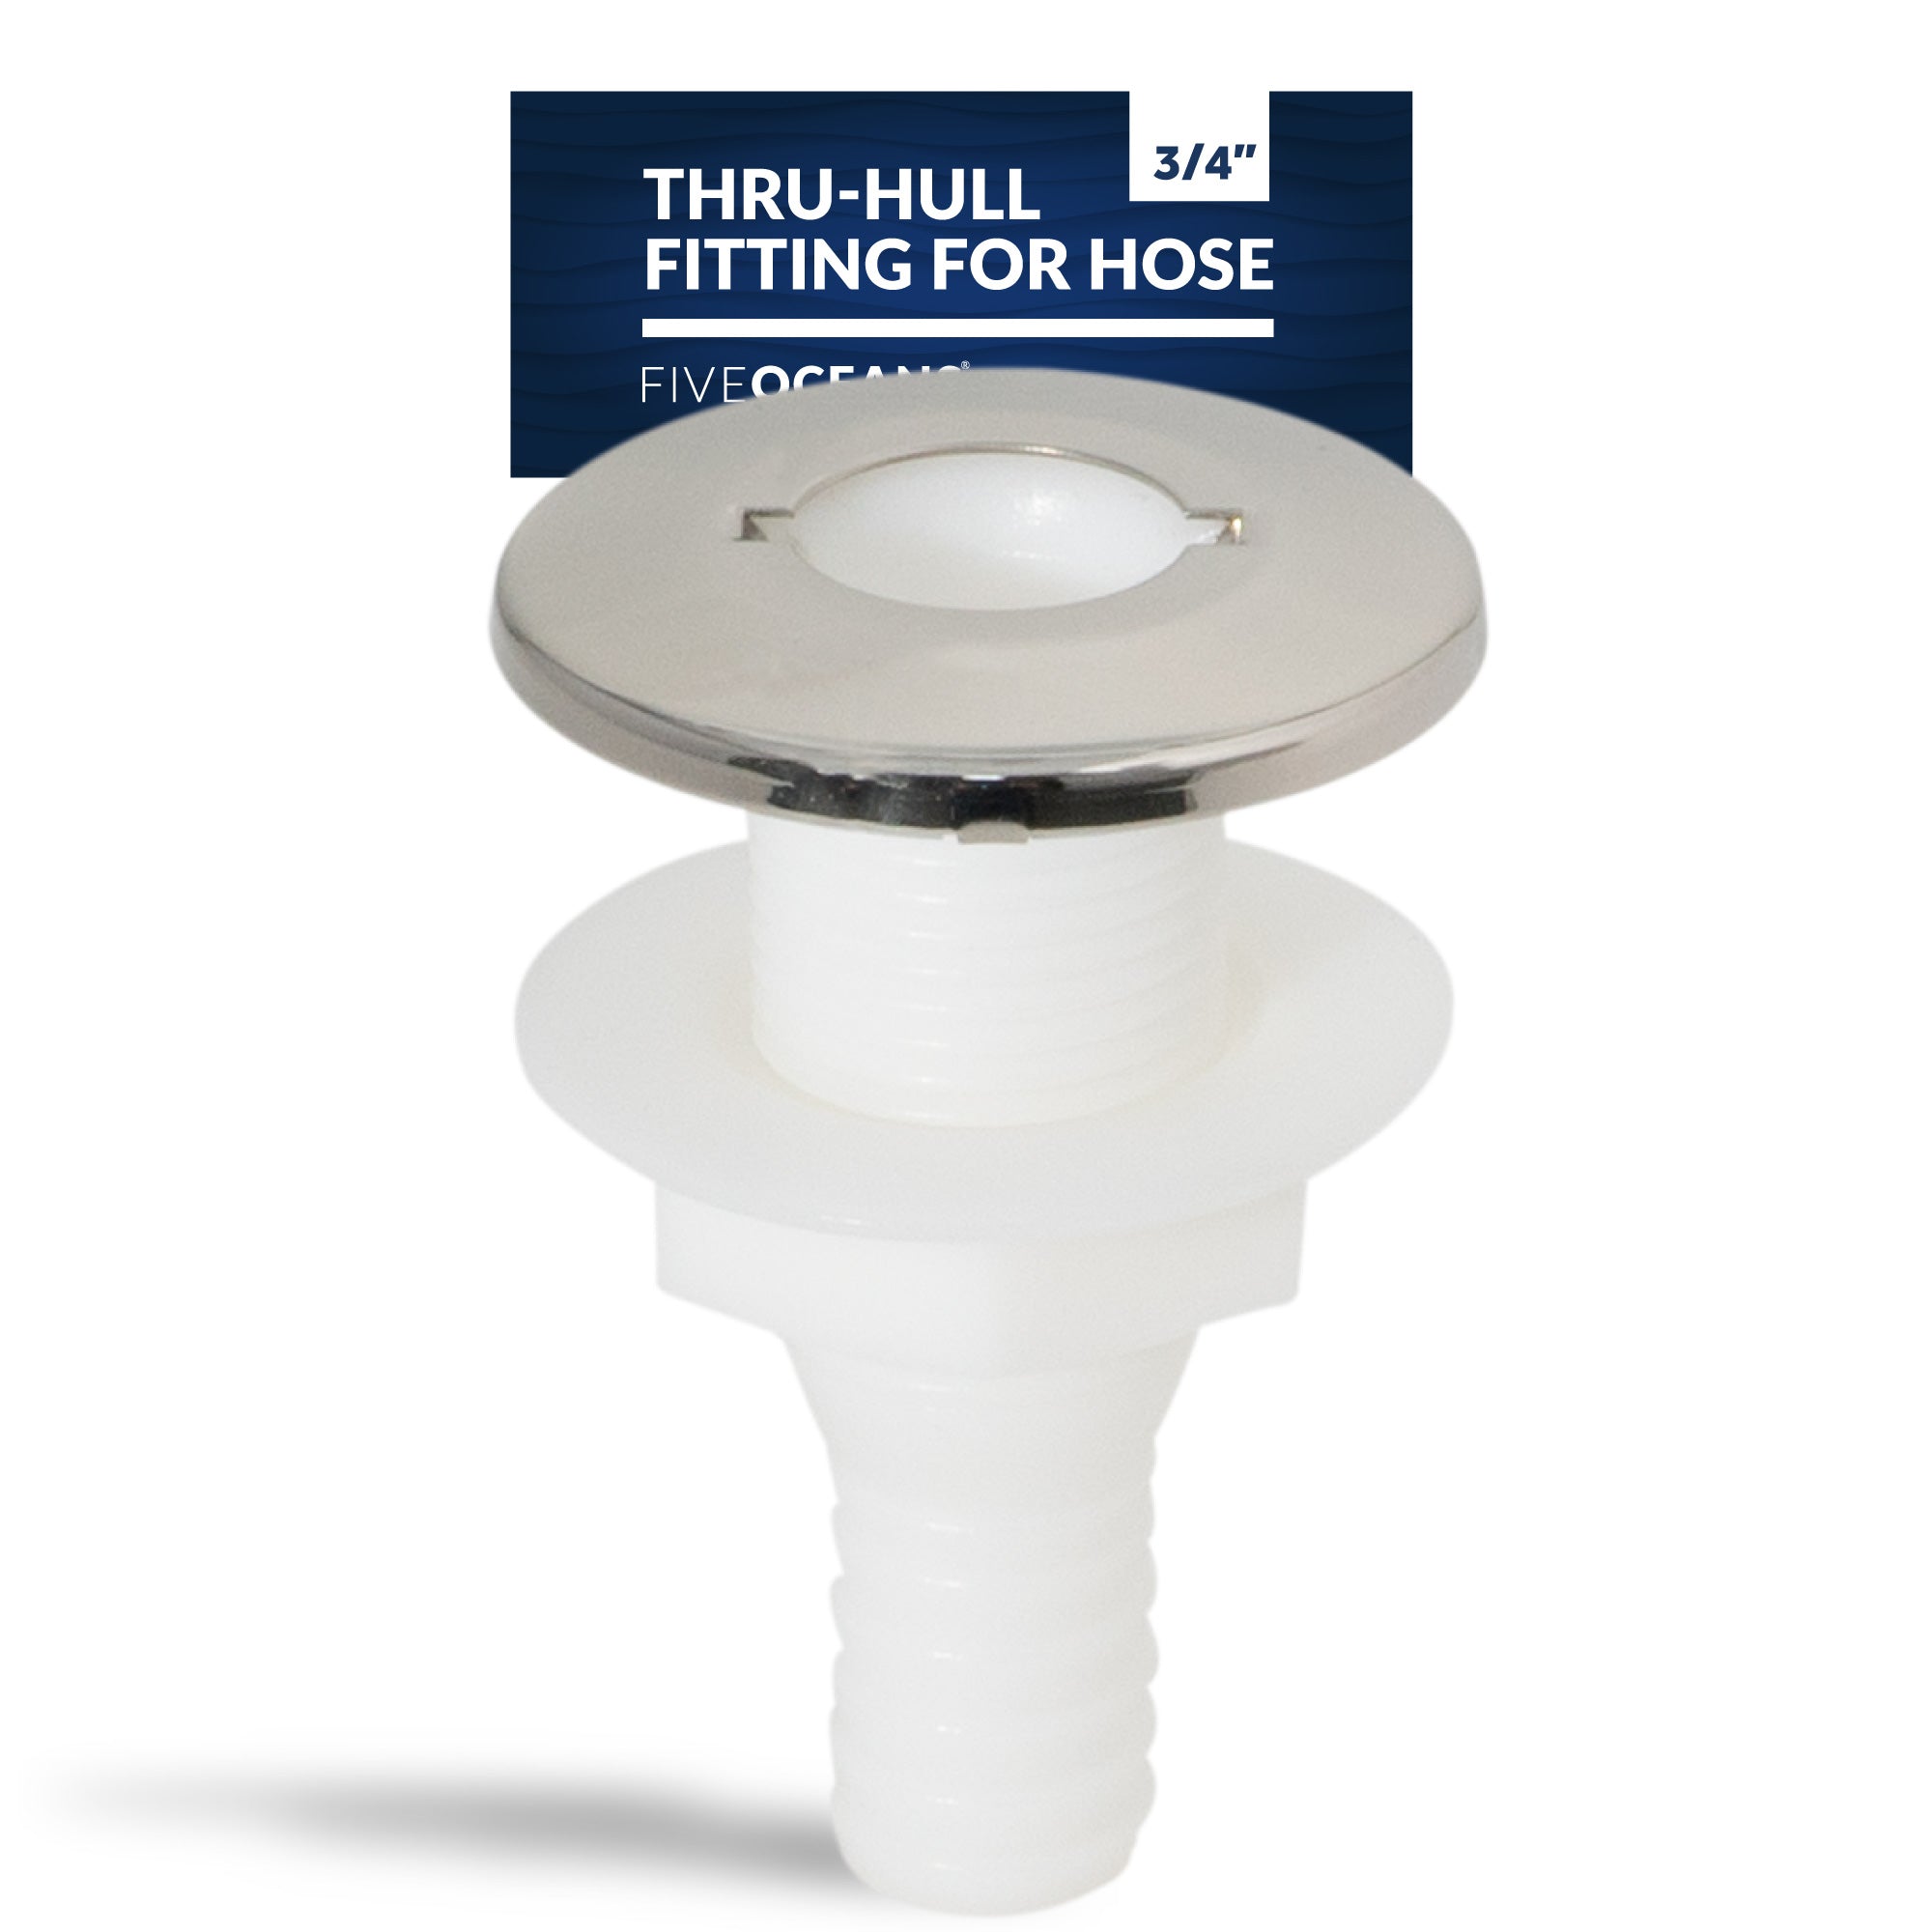 Thru-Hull Fitting for Hose, 3/4" White, Stainless Steel Head - FO2558